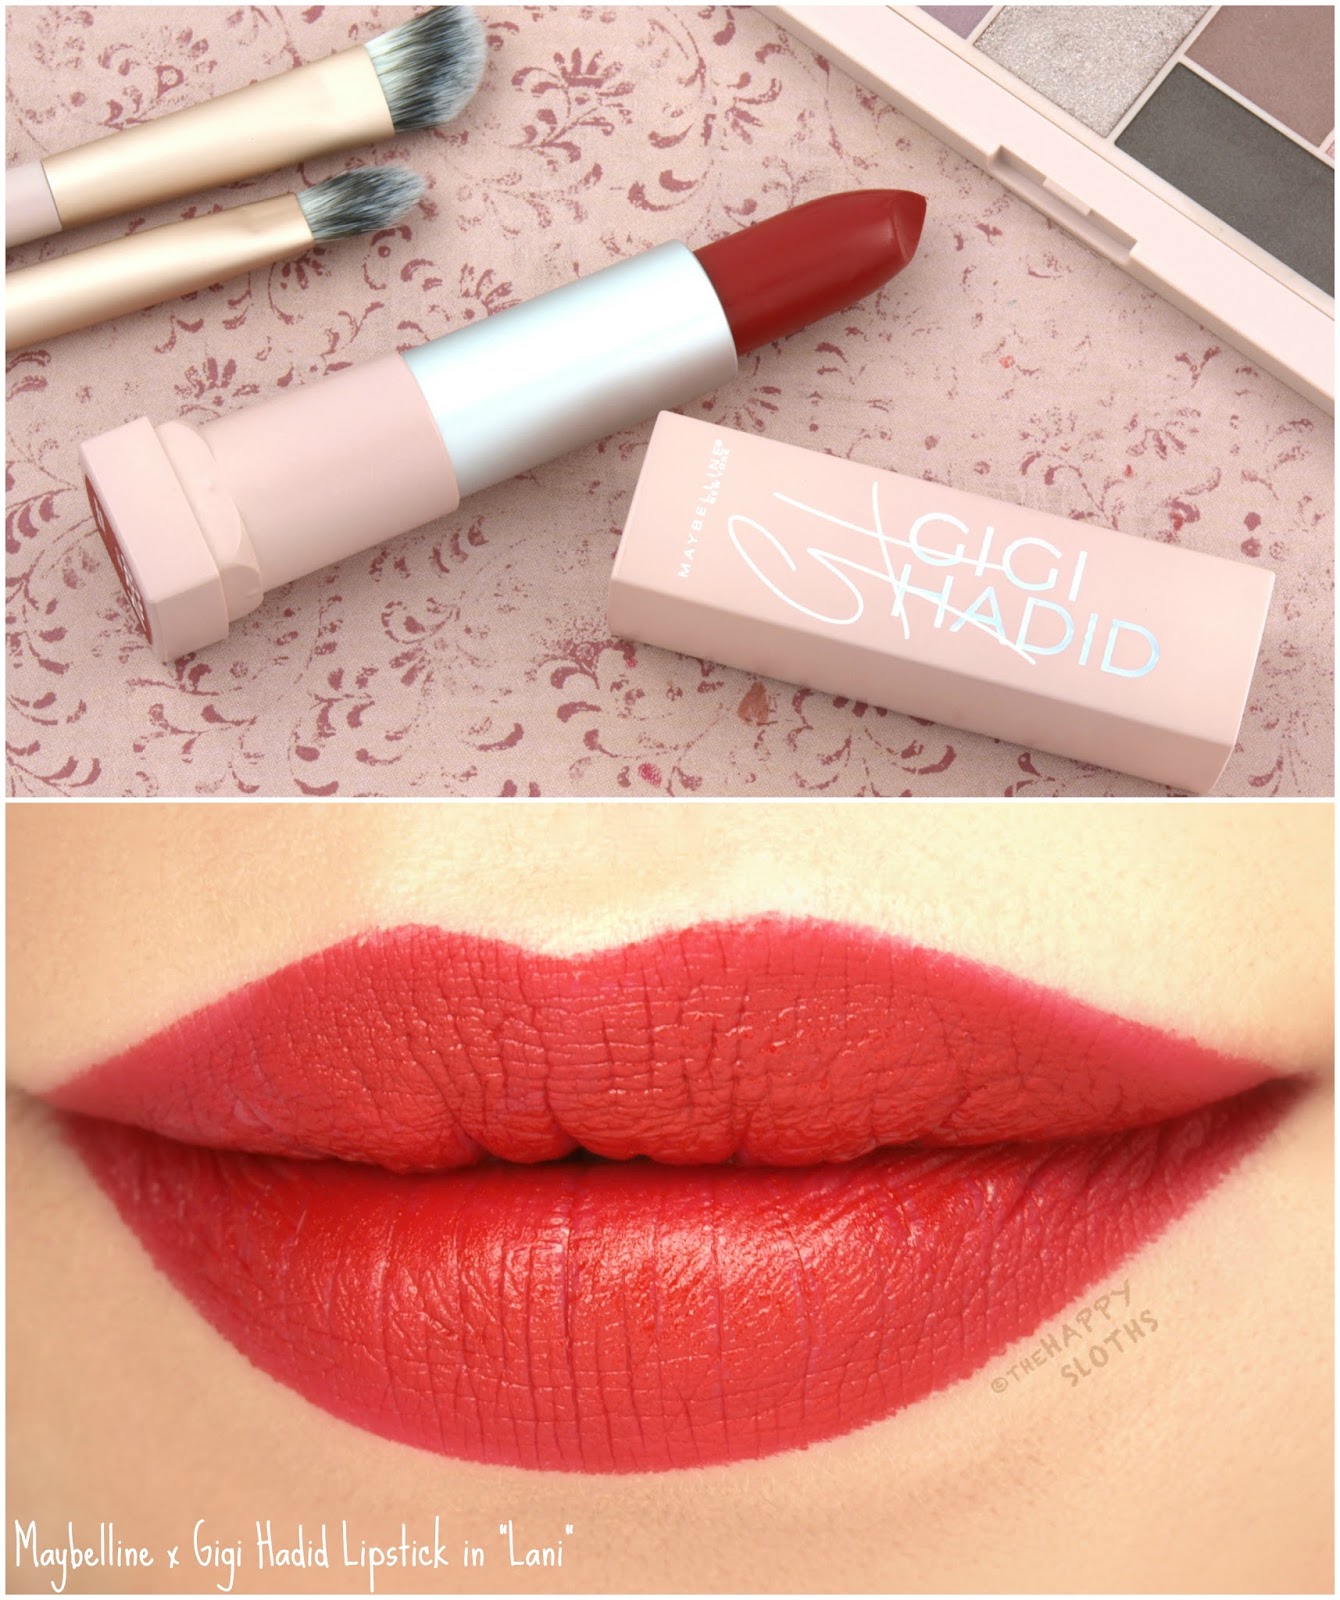 Maybelline x Gigi Hadid Lipstick in "Lani": Review and Swatches